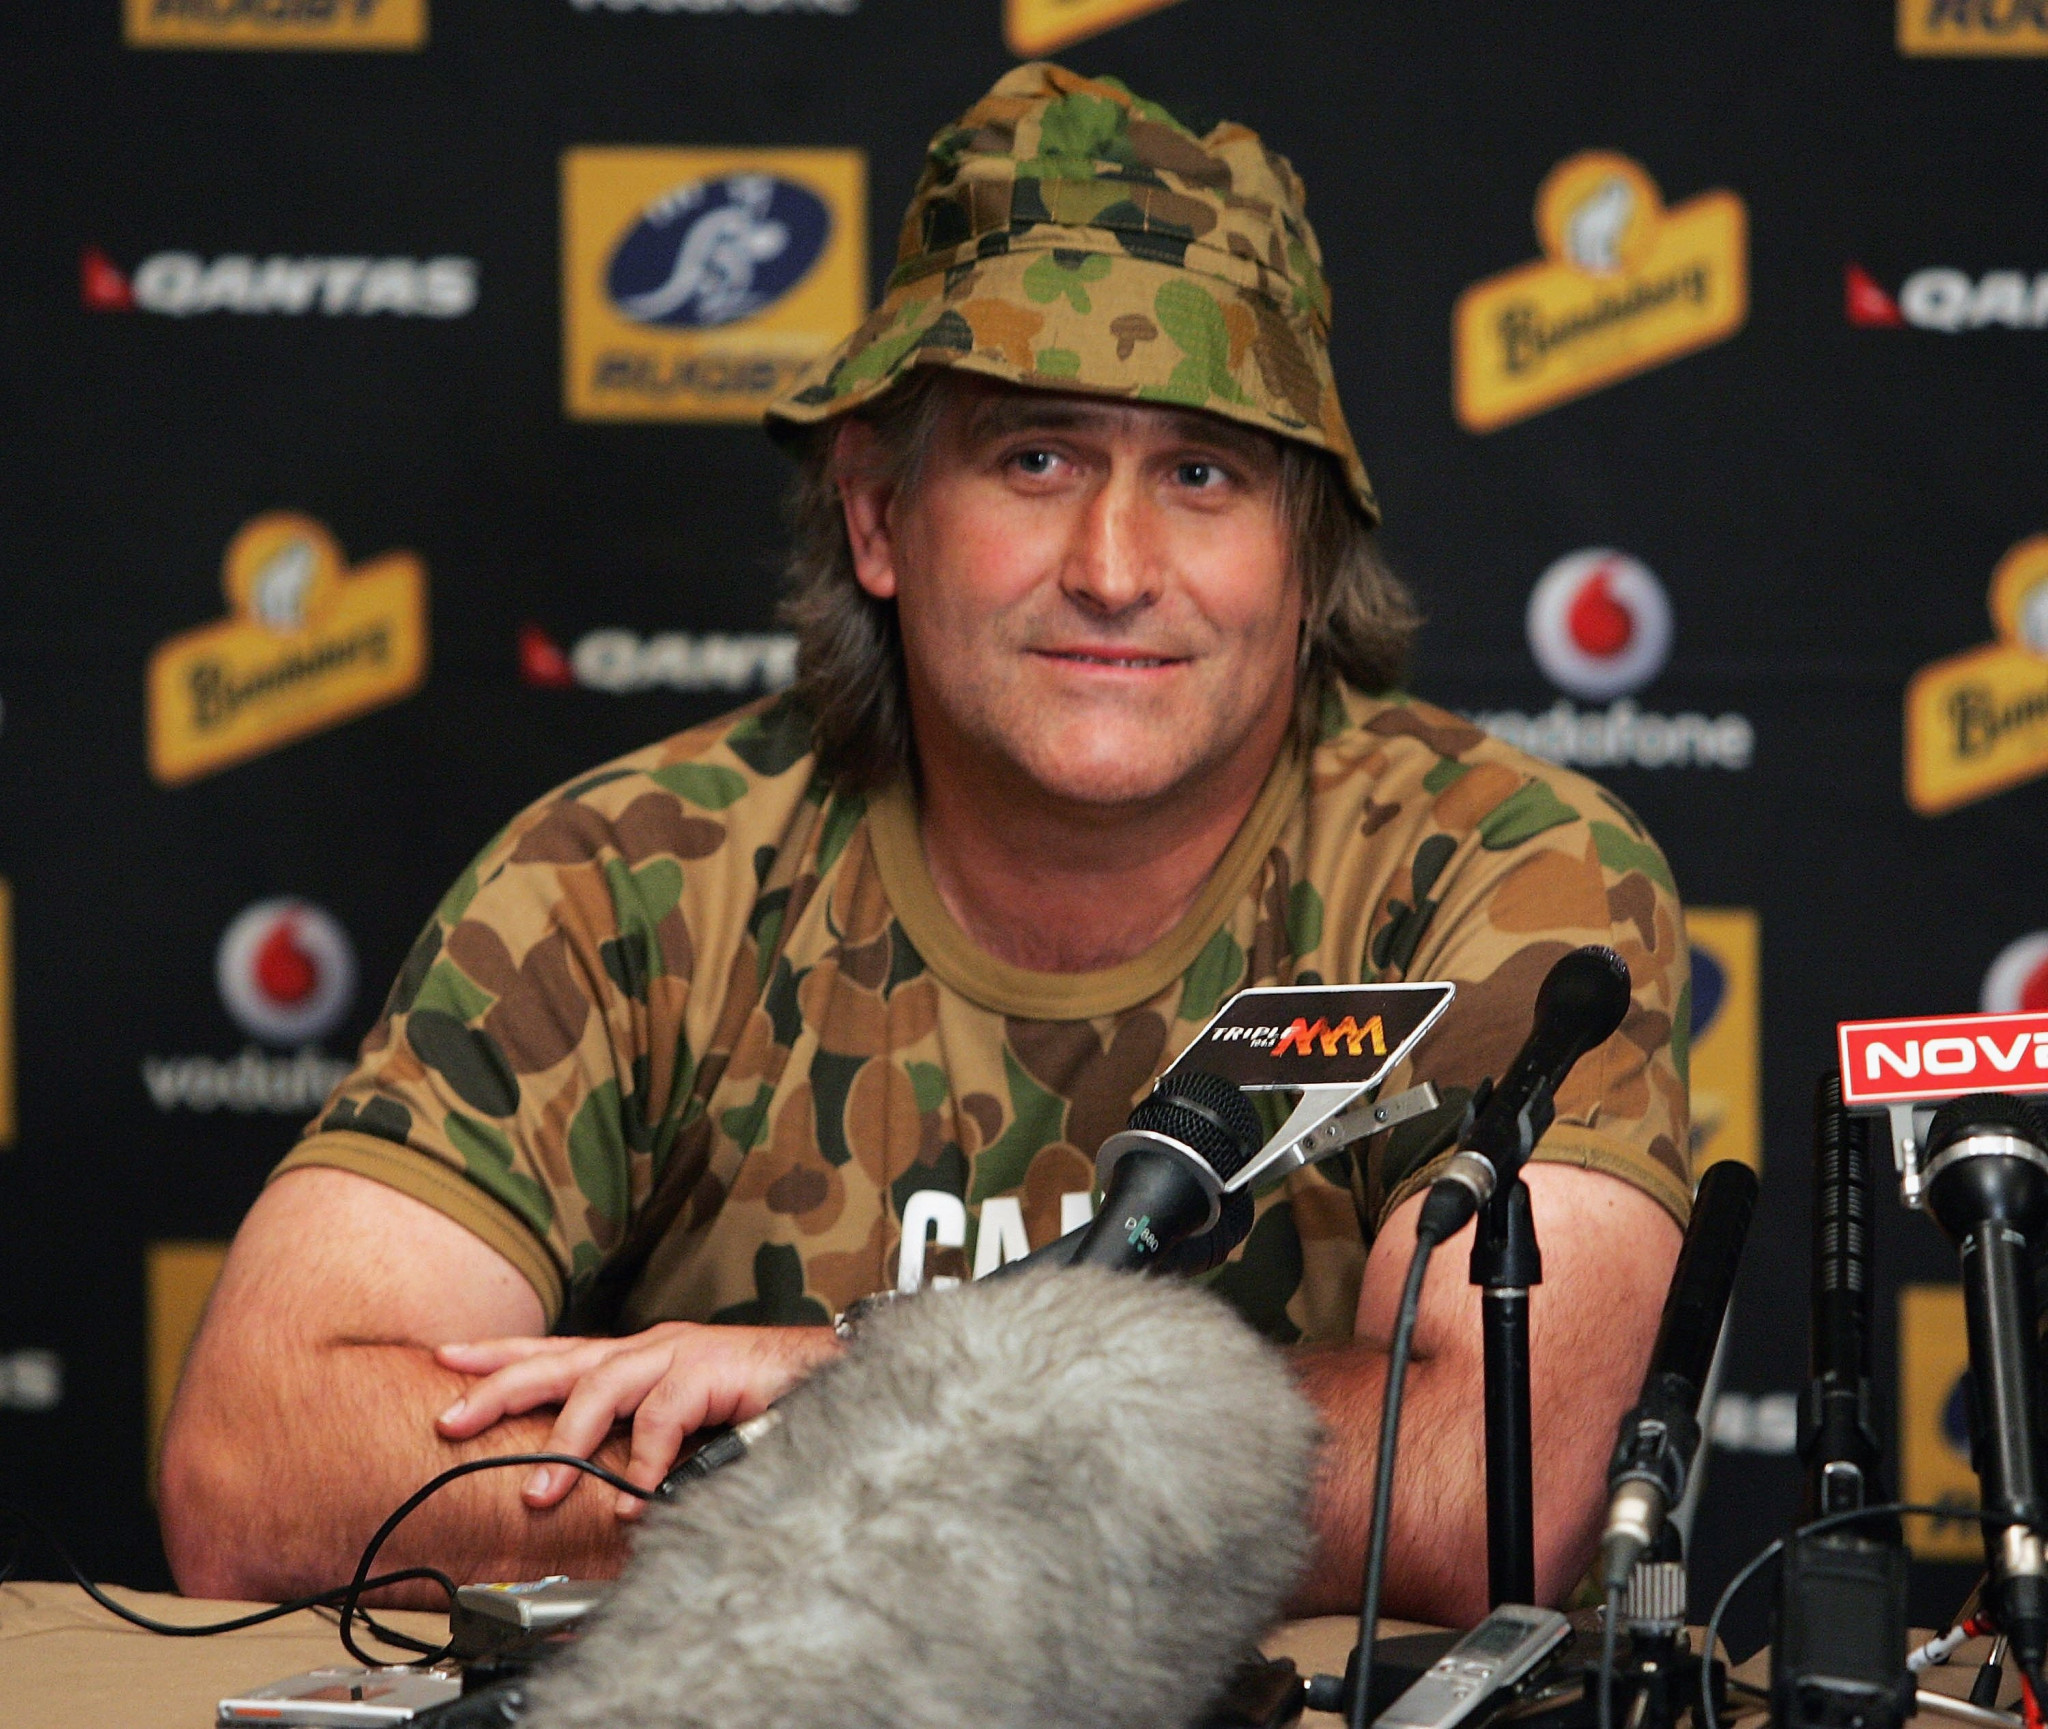 Former Australian attack coach Scott Johnson poked fun at suggestions of spying by wearing camouflage to a press conference ©Getty Images